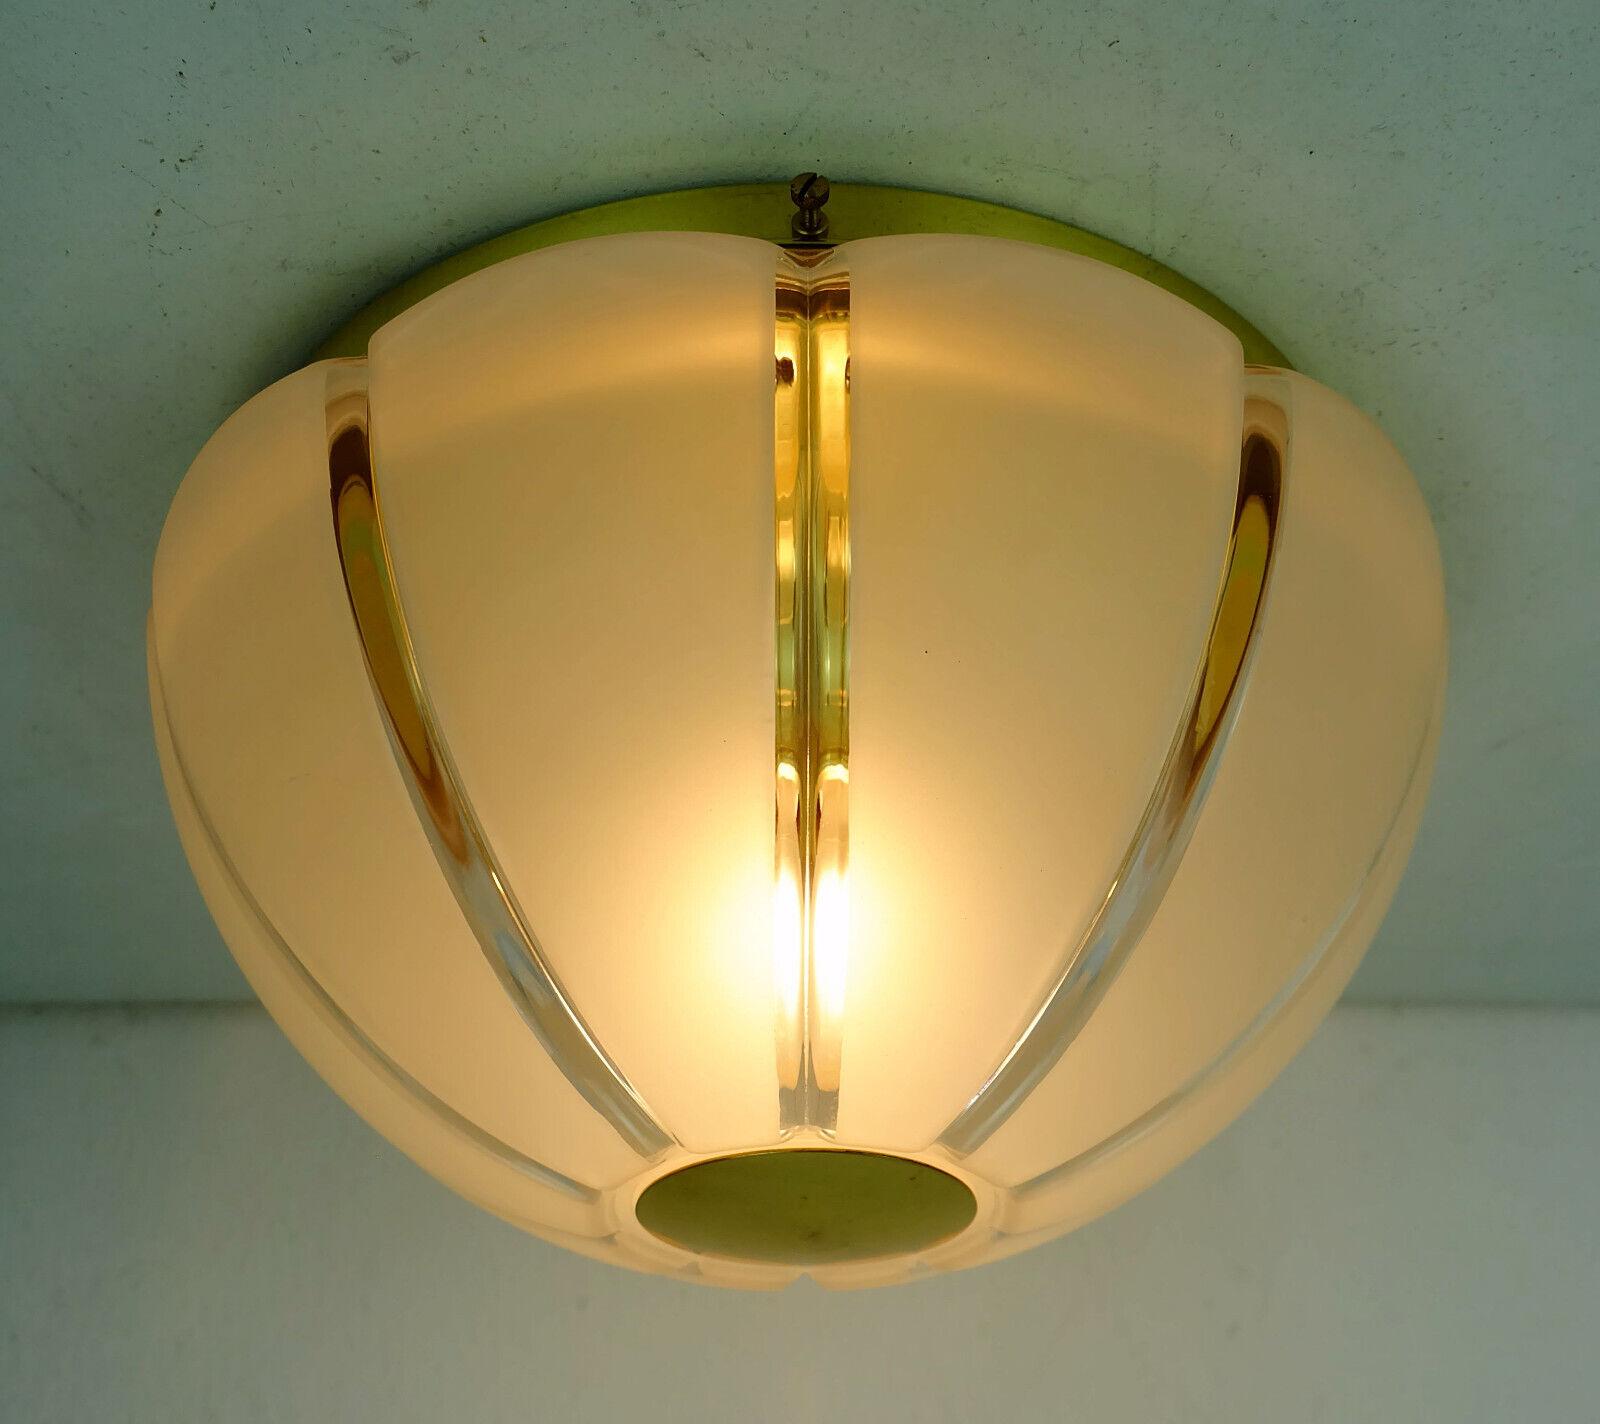 Midcentury ceiling lamp manufactured in the 1970s by Glashuette Limburg. Model A507. The shade is made of fluted clear glass that is etched on the raised parts and clear in the flutes. The translucent gold color of the base plate creates beautiful